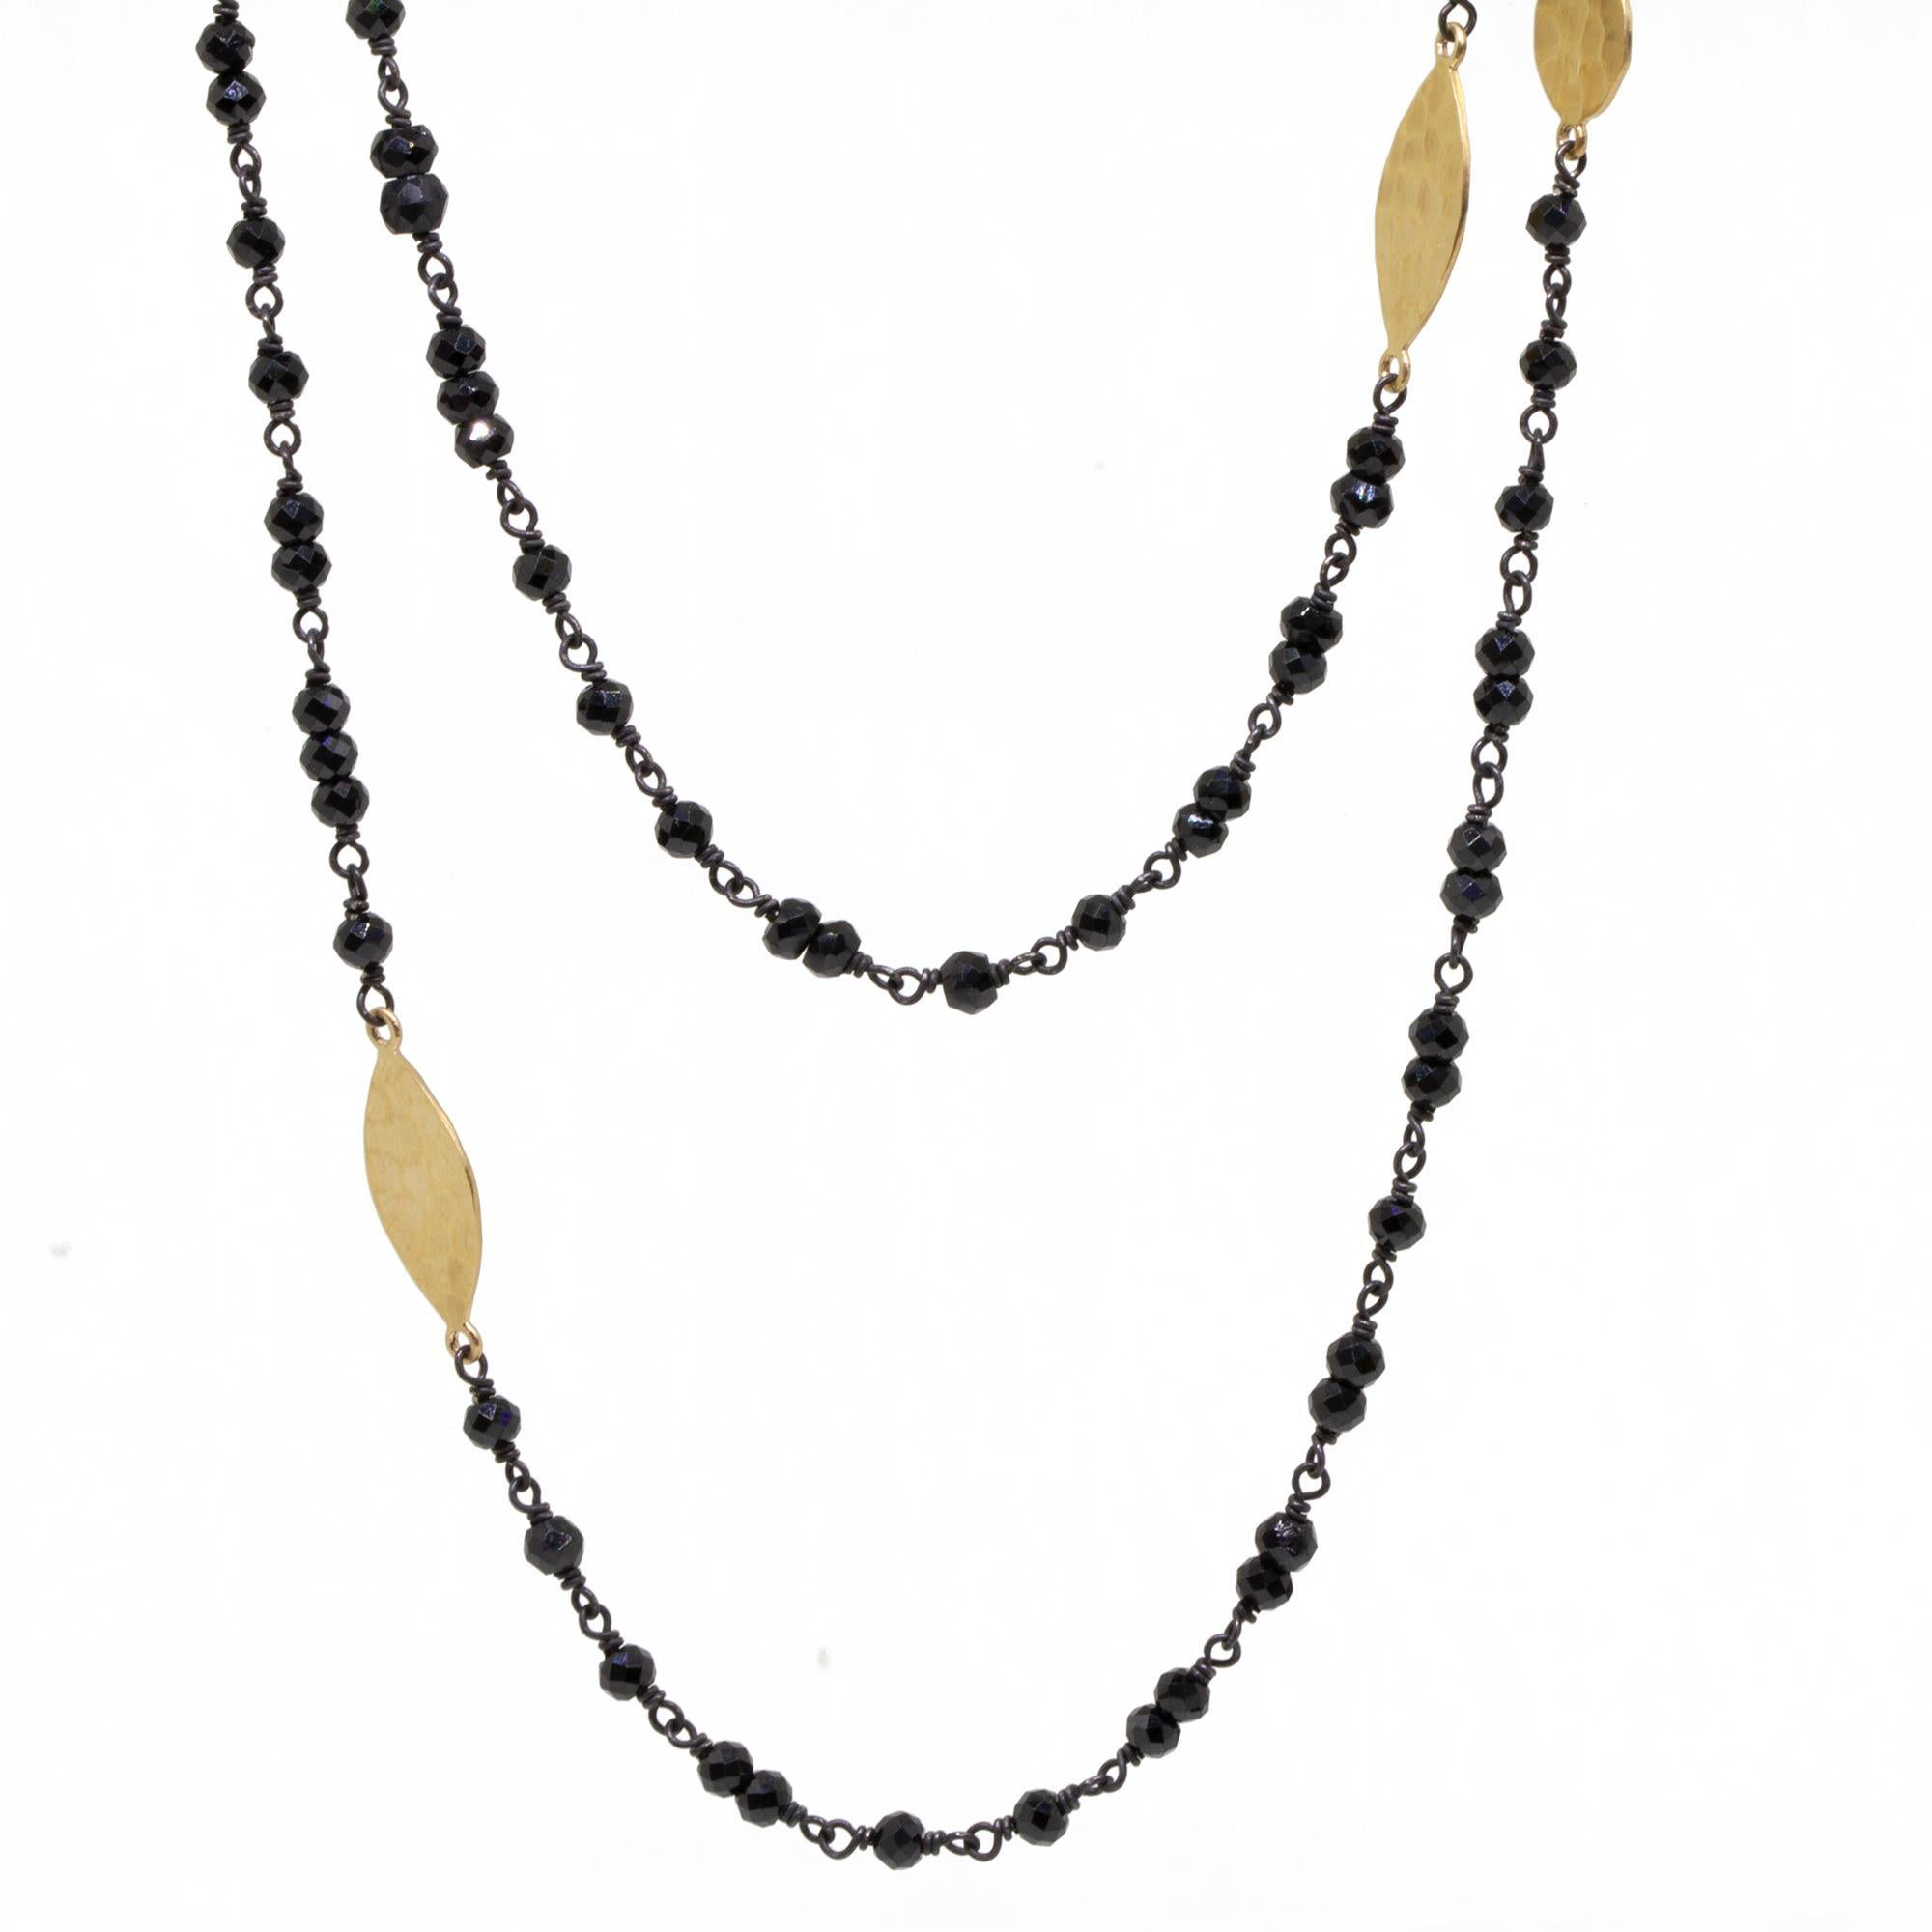 Featuring textured gold marquise shapes at stations along a strand of black spinel beads, the Spectrum Gold & Oxidized Necklace is the perfect length for wearing long and swingy, or doubled up for a gorgeously sun-kissed layered look.

Metal: Black